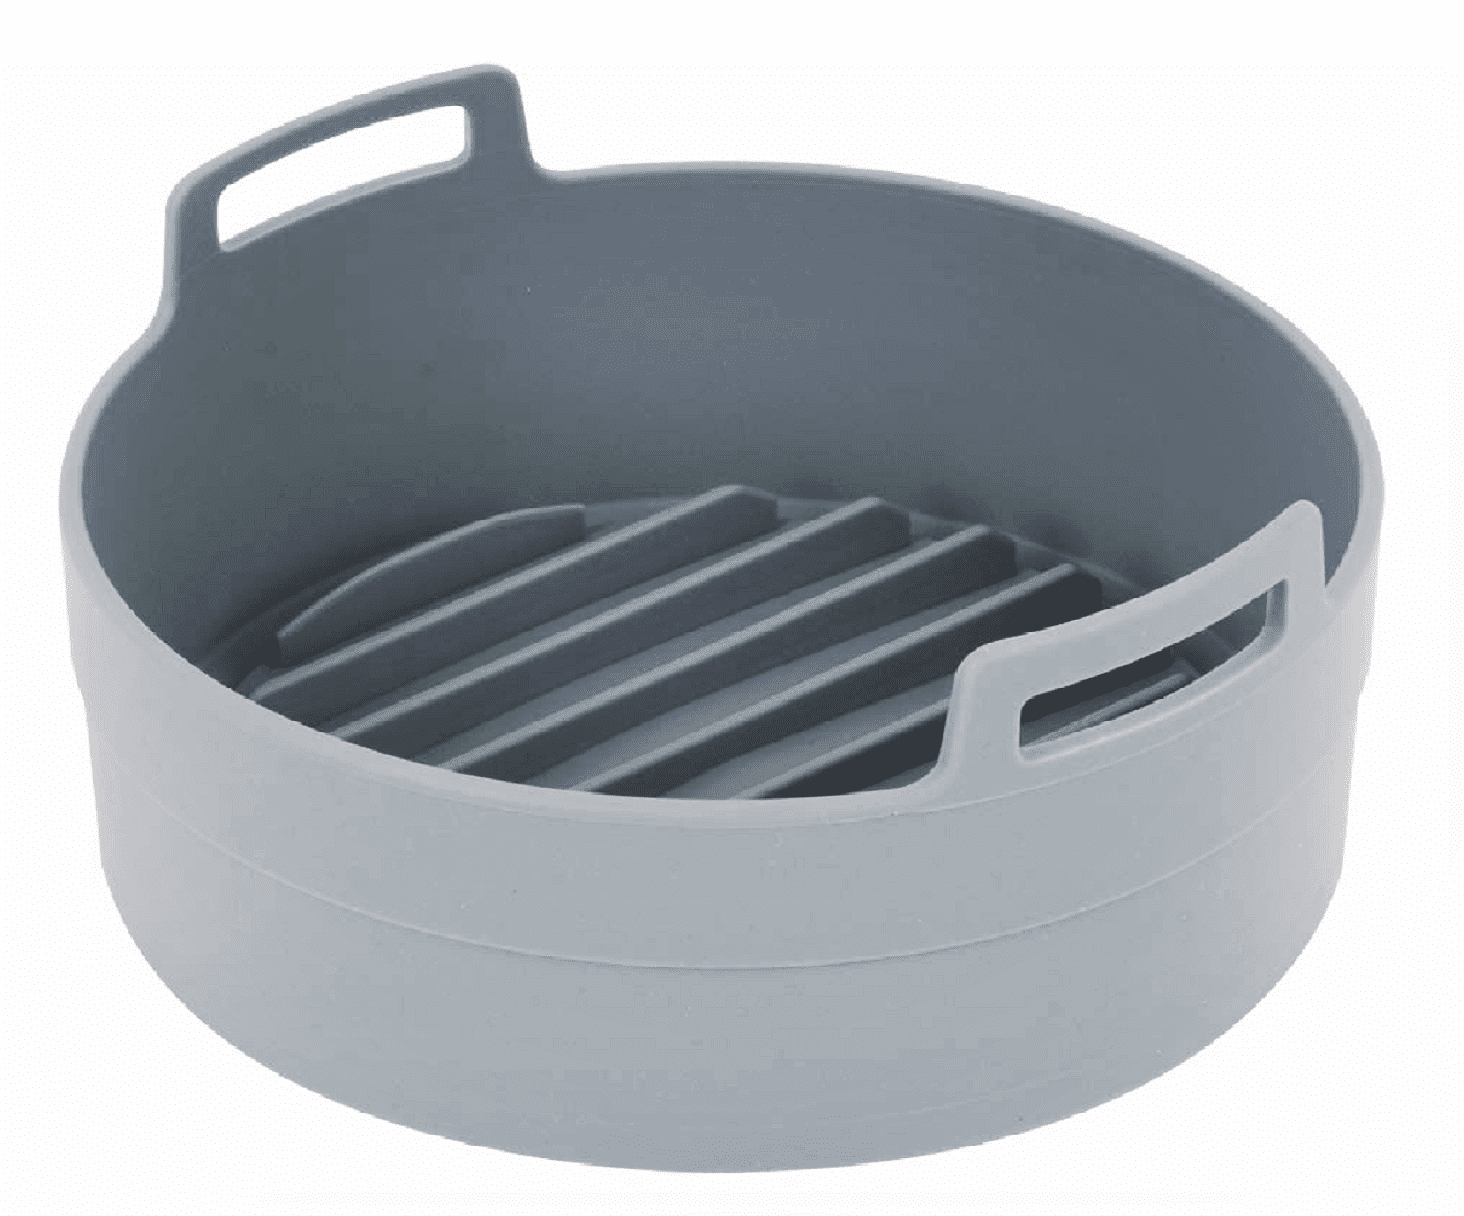 Air Fryer Silicone Pot Insert – Air Fryer Things